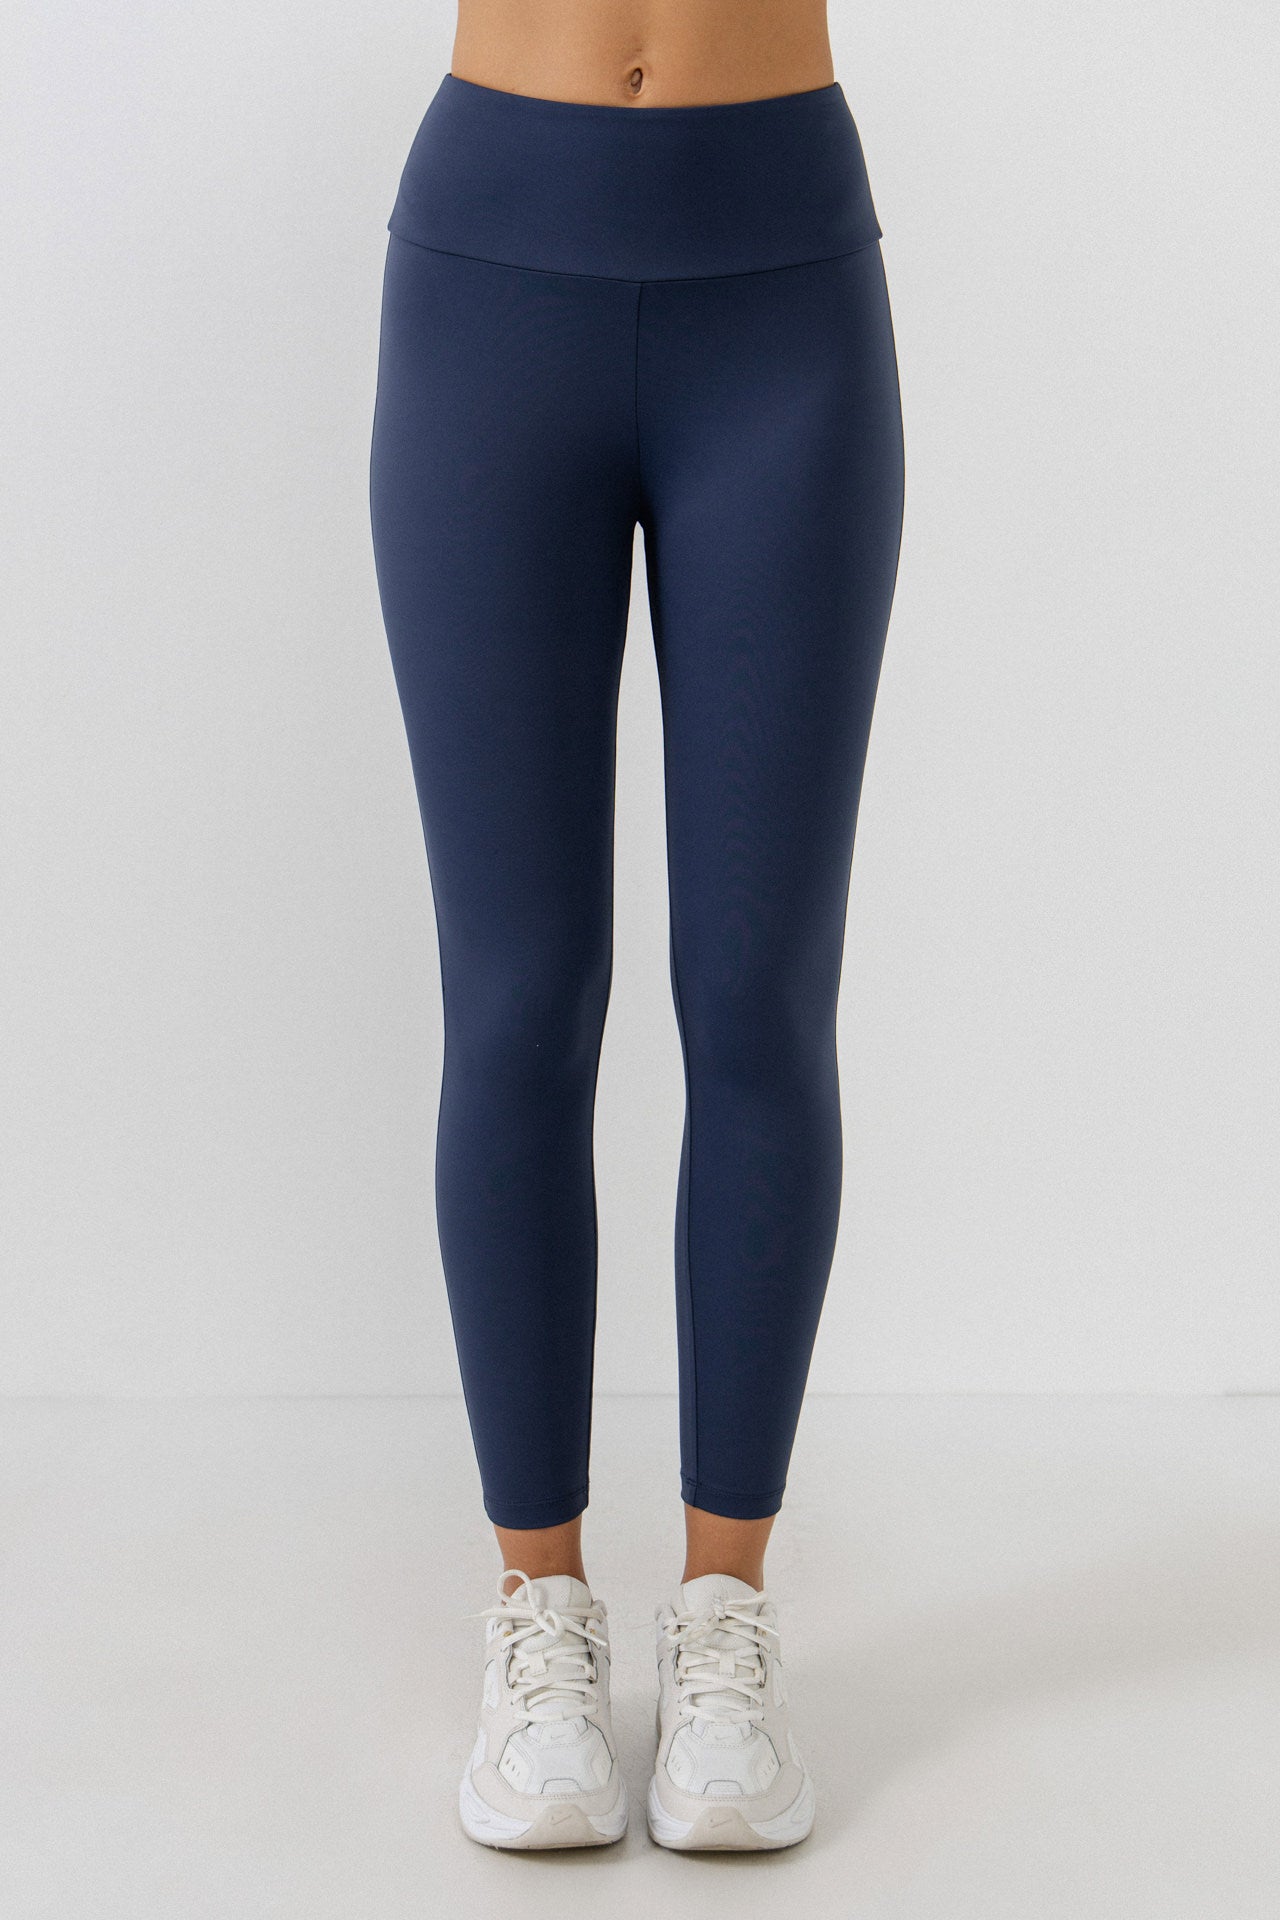 GREY LAB - Leggings - PANTS available at Objectrare